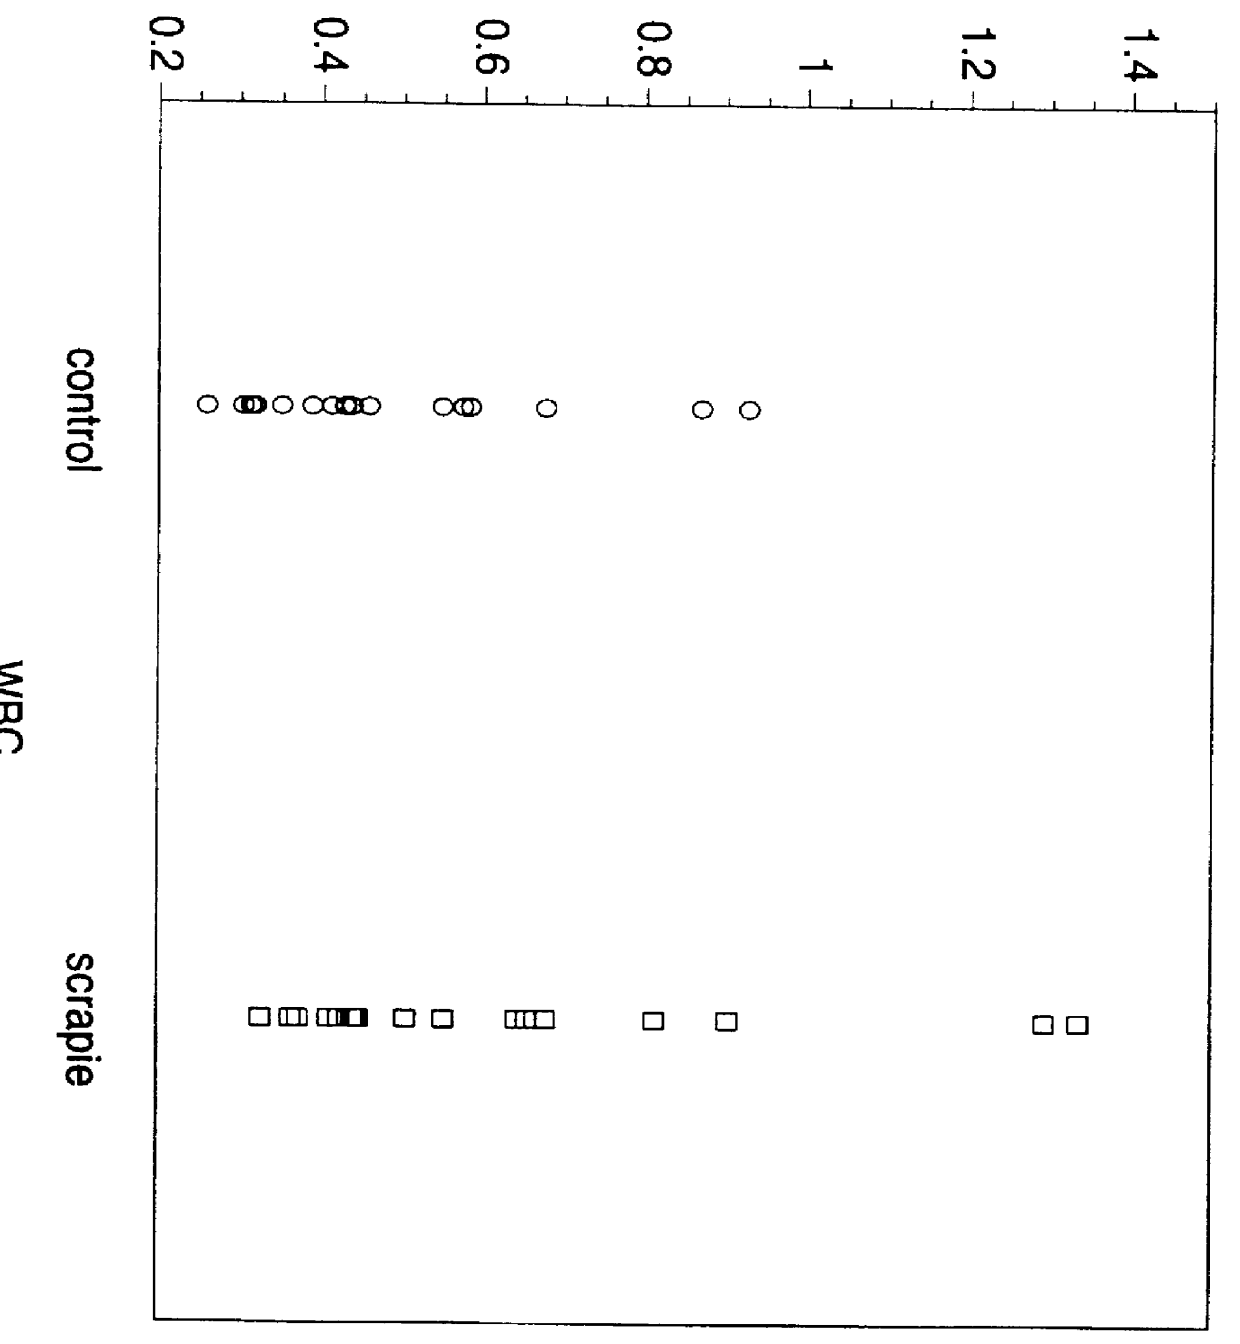 Method of concentrating prion proteins in blood samples